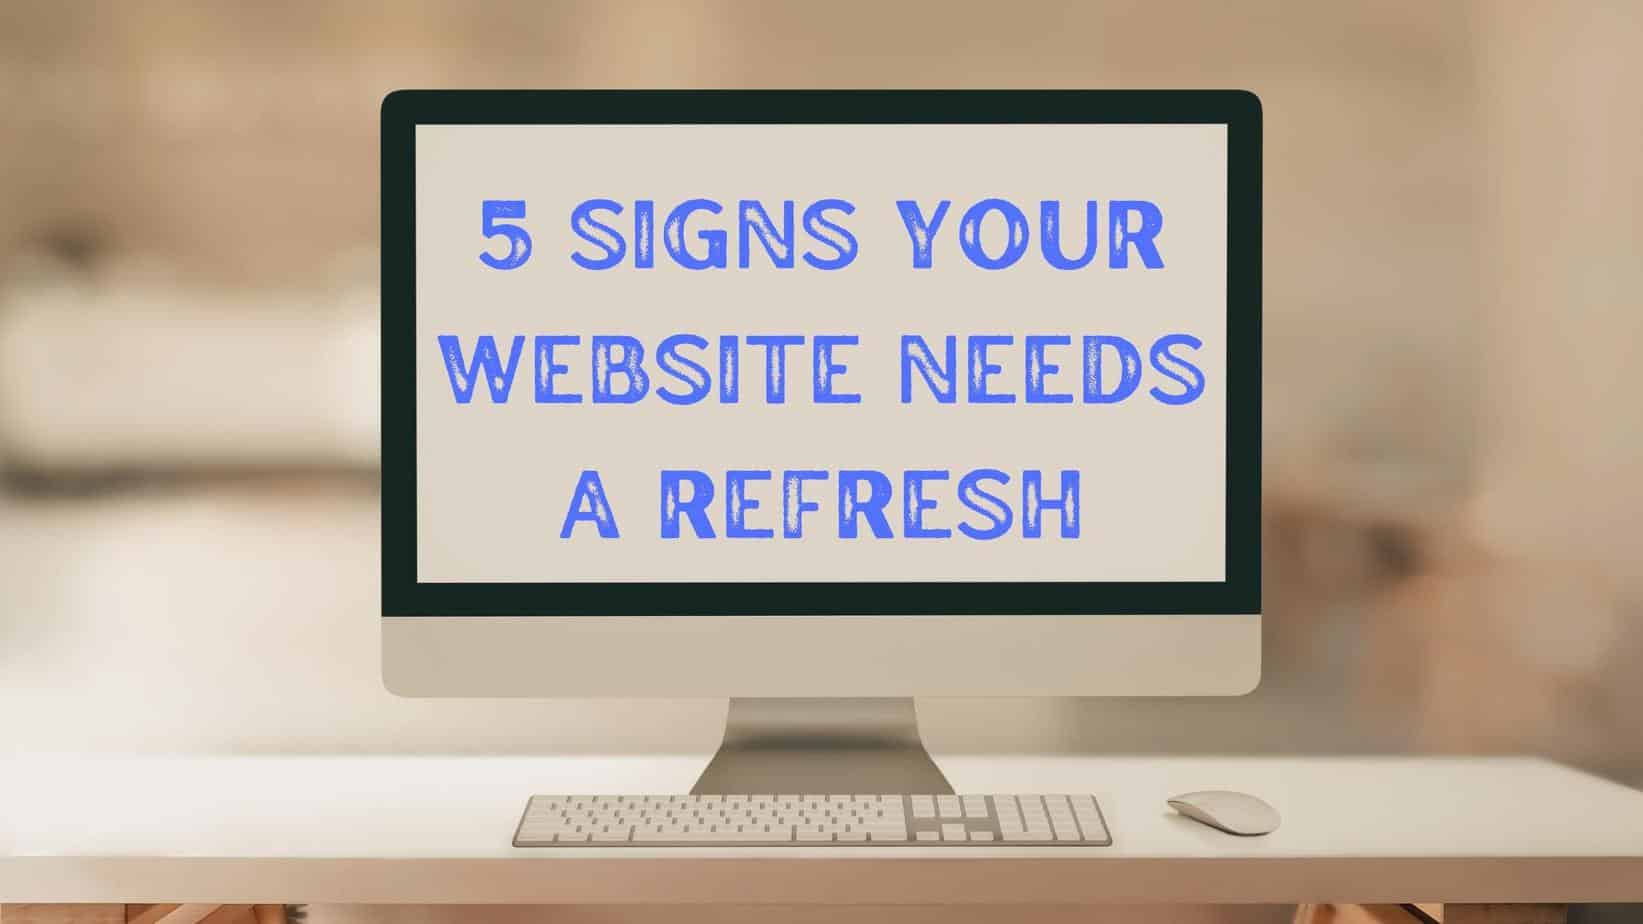 Featured image for “5 Signs Your Website Needs a Refresh”